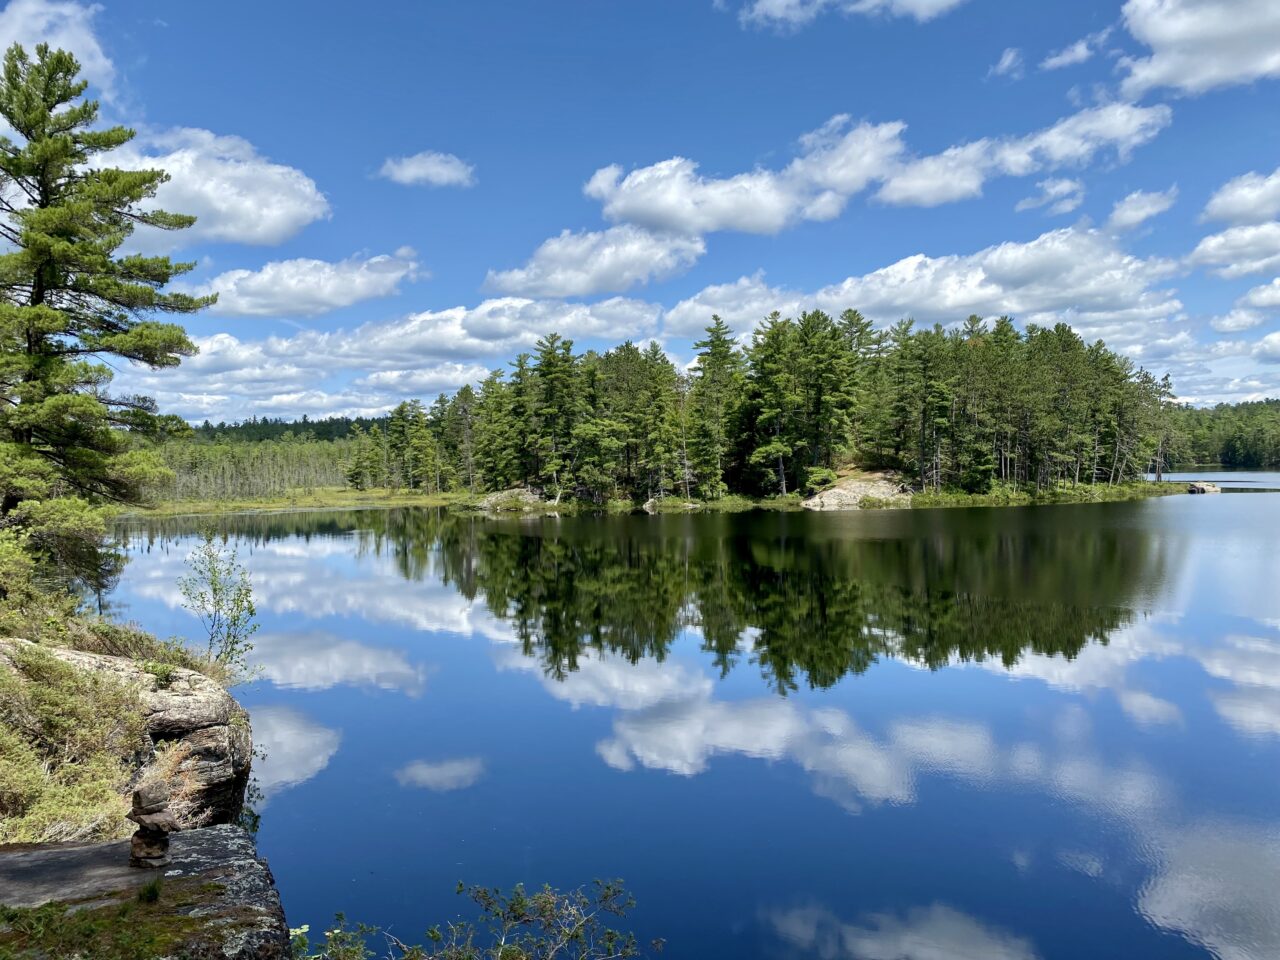 Picture of Kawartha Highlands with trees lining a body of water